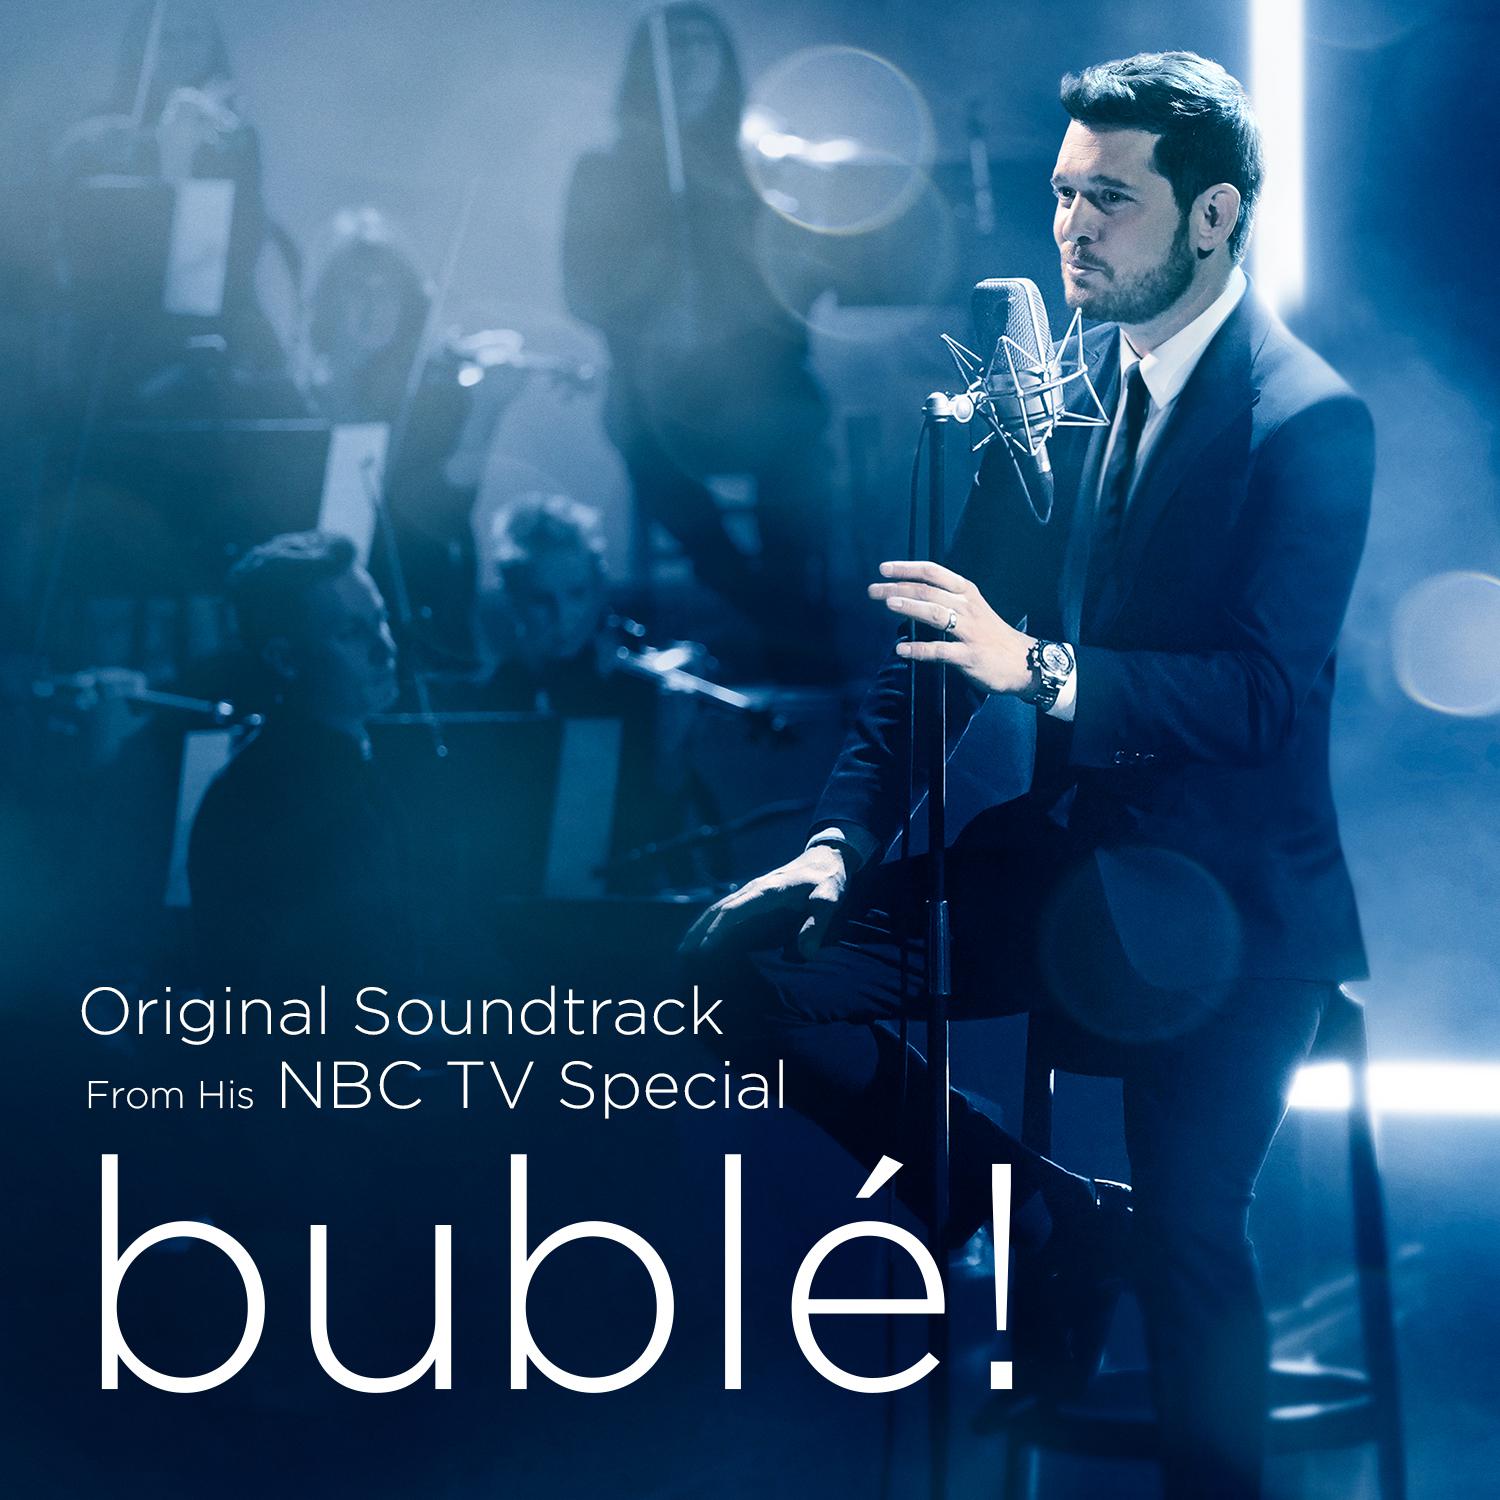 buble! Original Soundtrack from his NBC TV Special